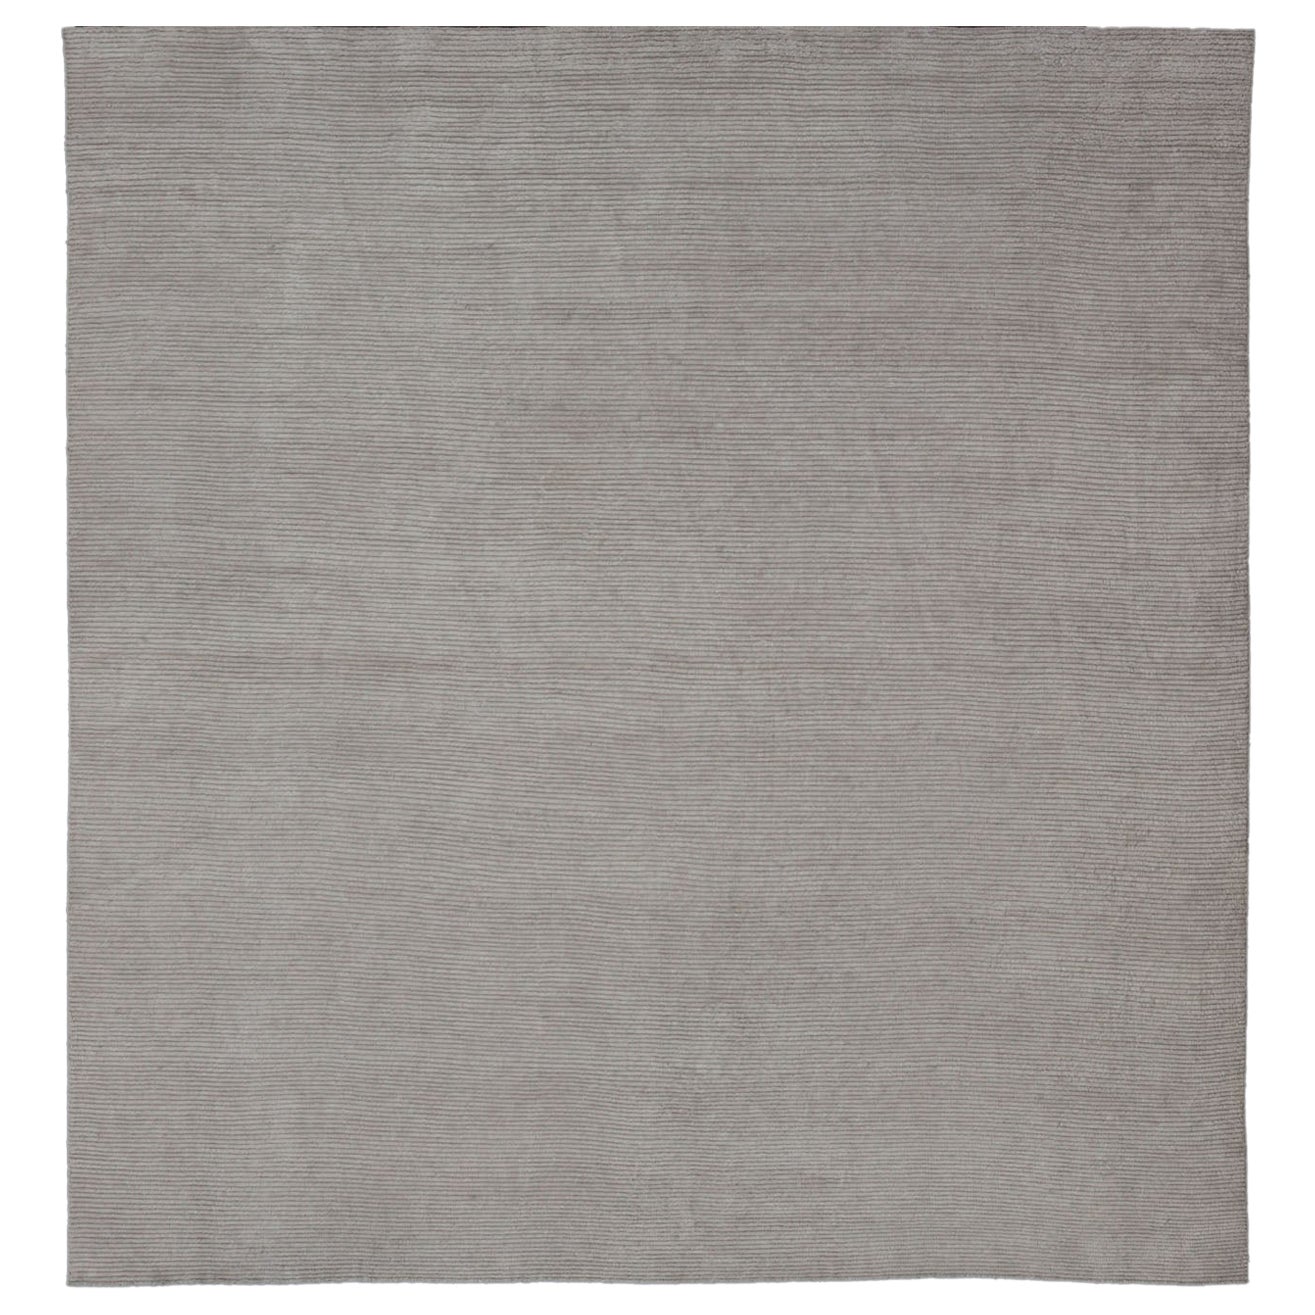 Large Square Modern Rug with Minimalist  Design in off White and Beige